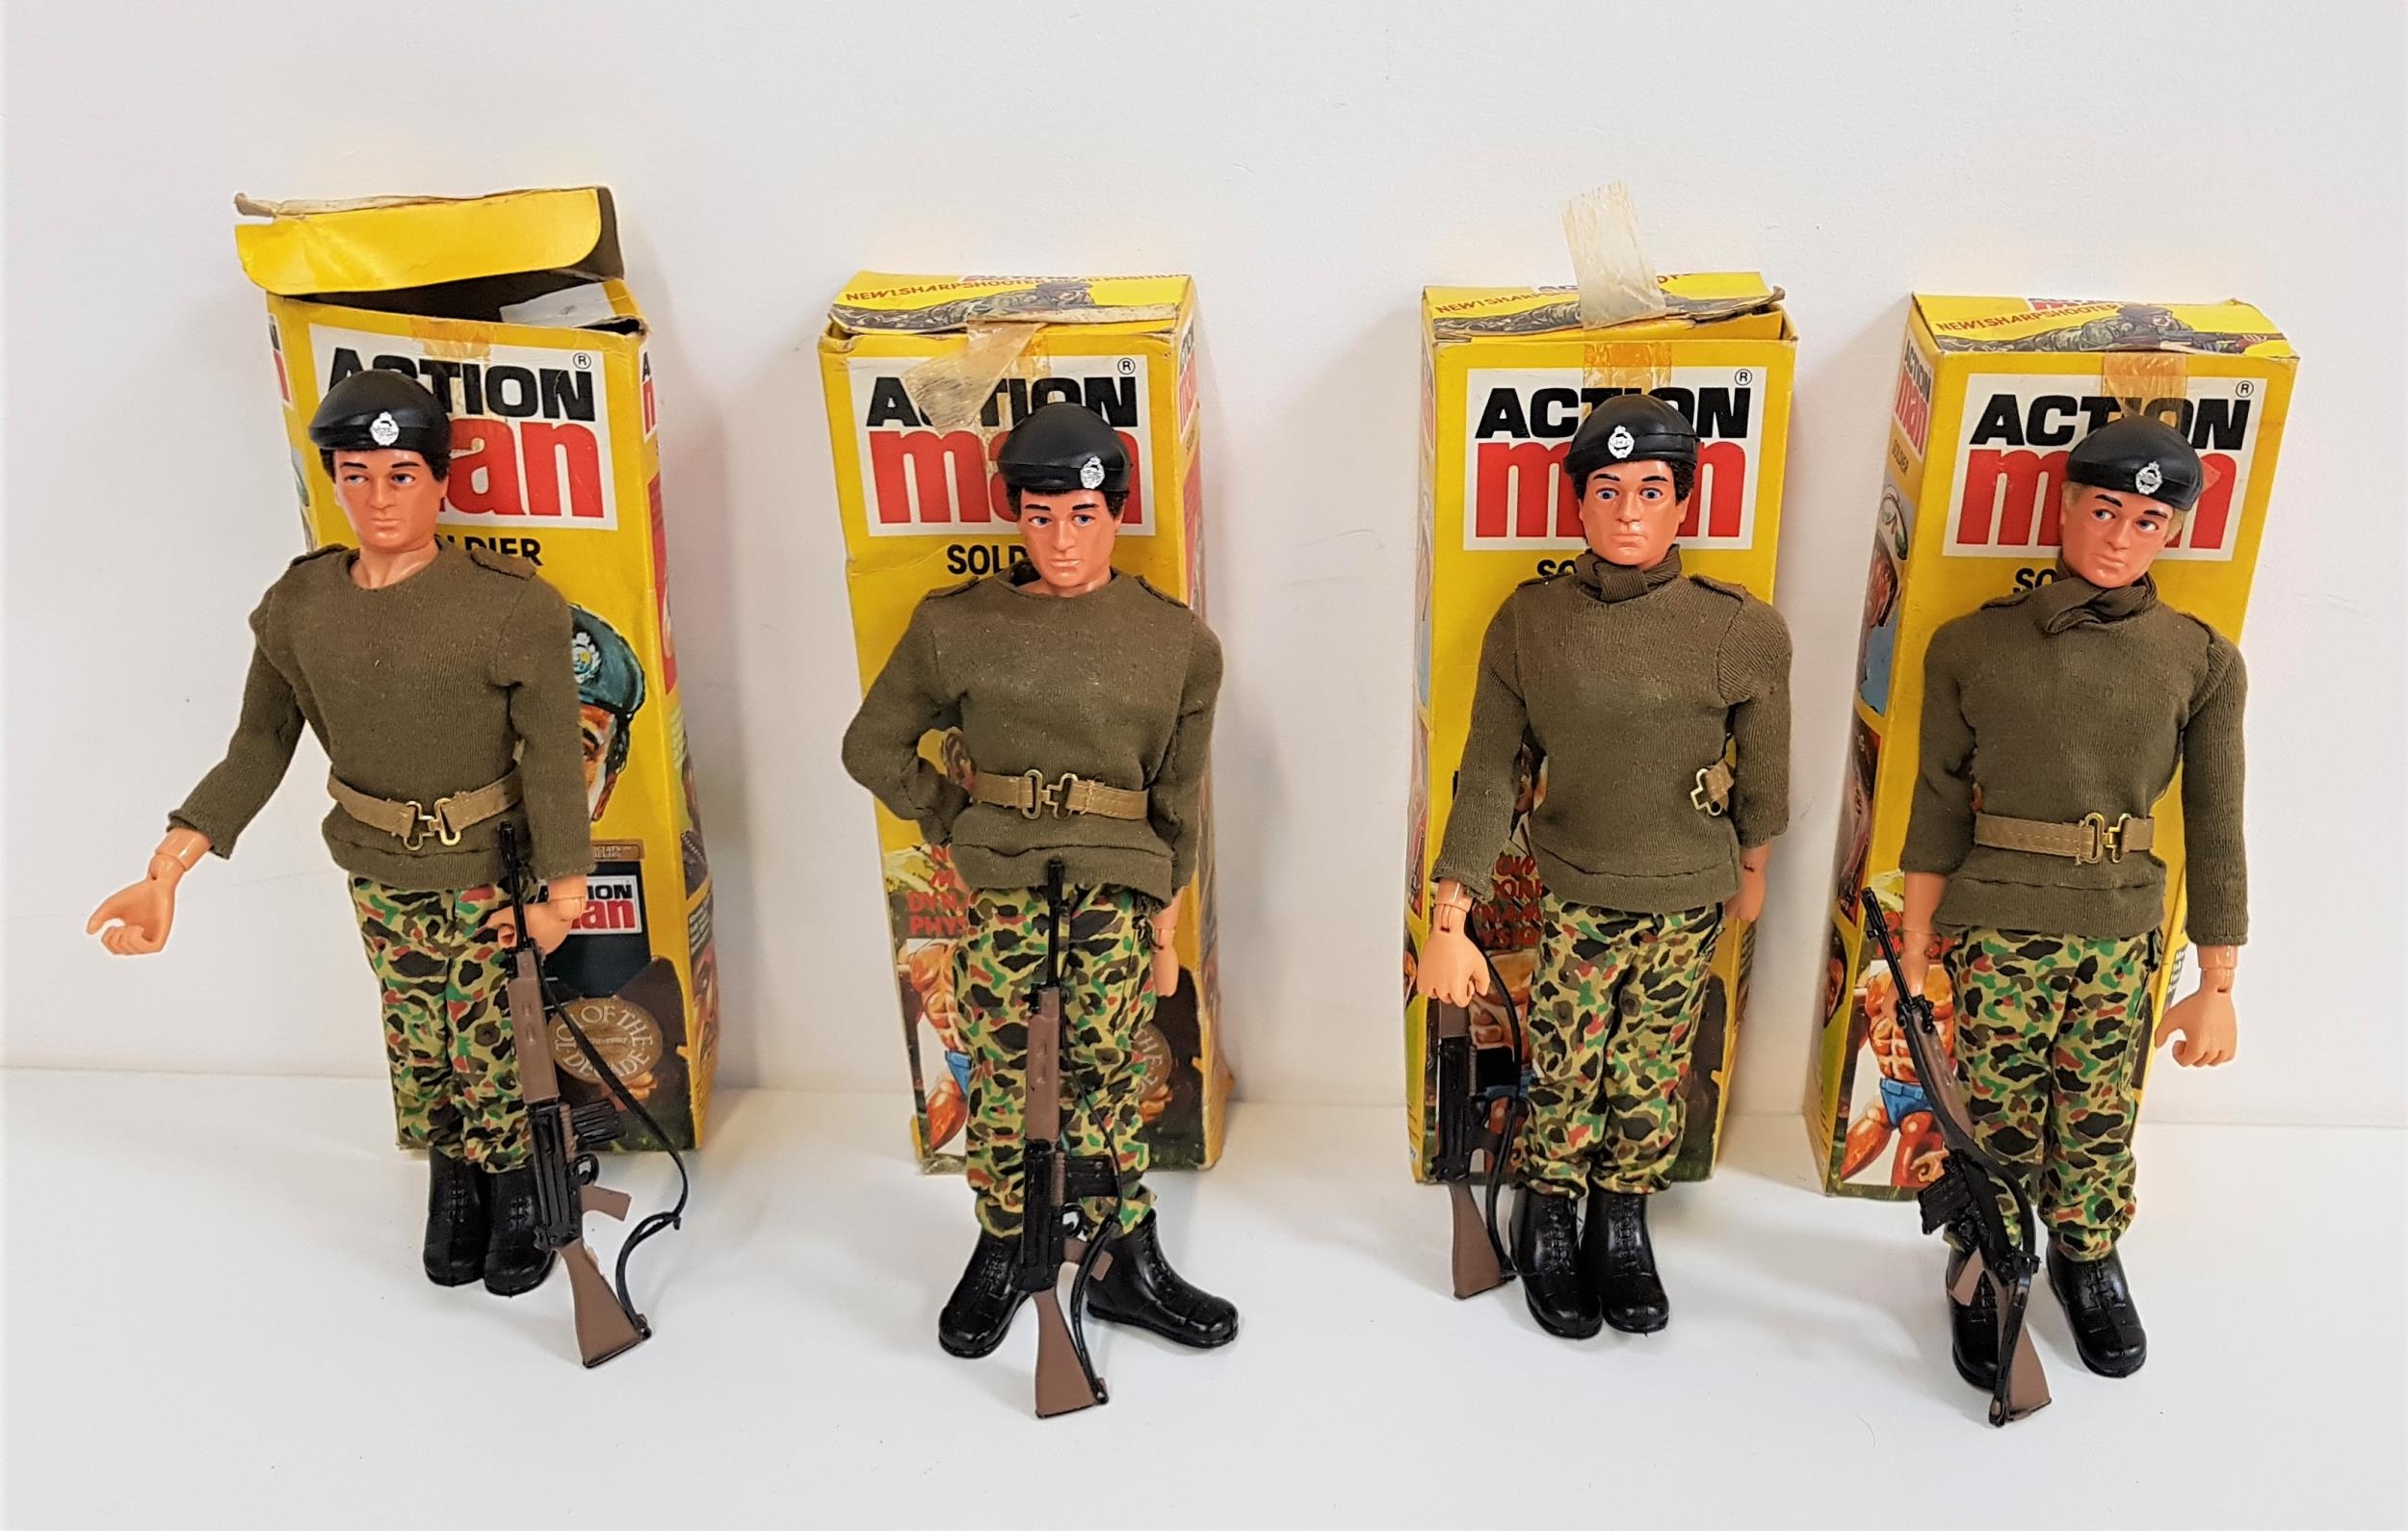 FOUR PALITOY ACTION MAN FIGURES all soldiers with military uniform, boots, beret, belt, scarf and